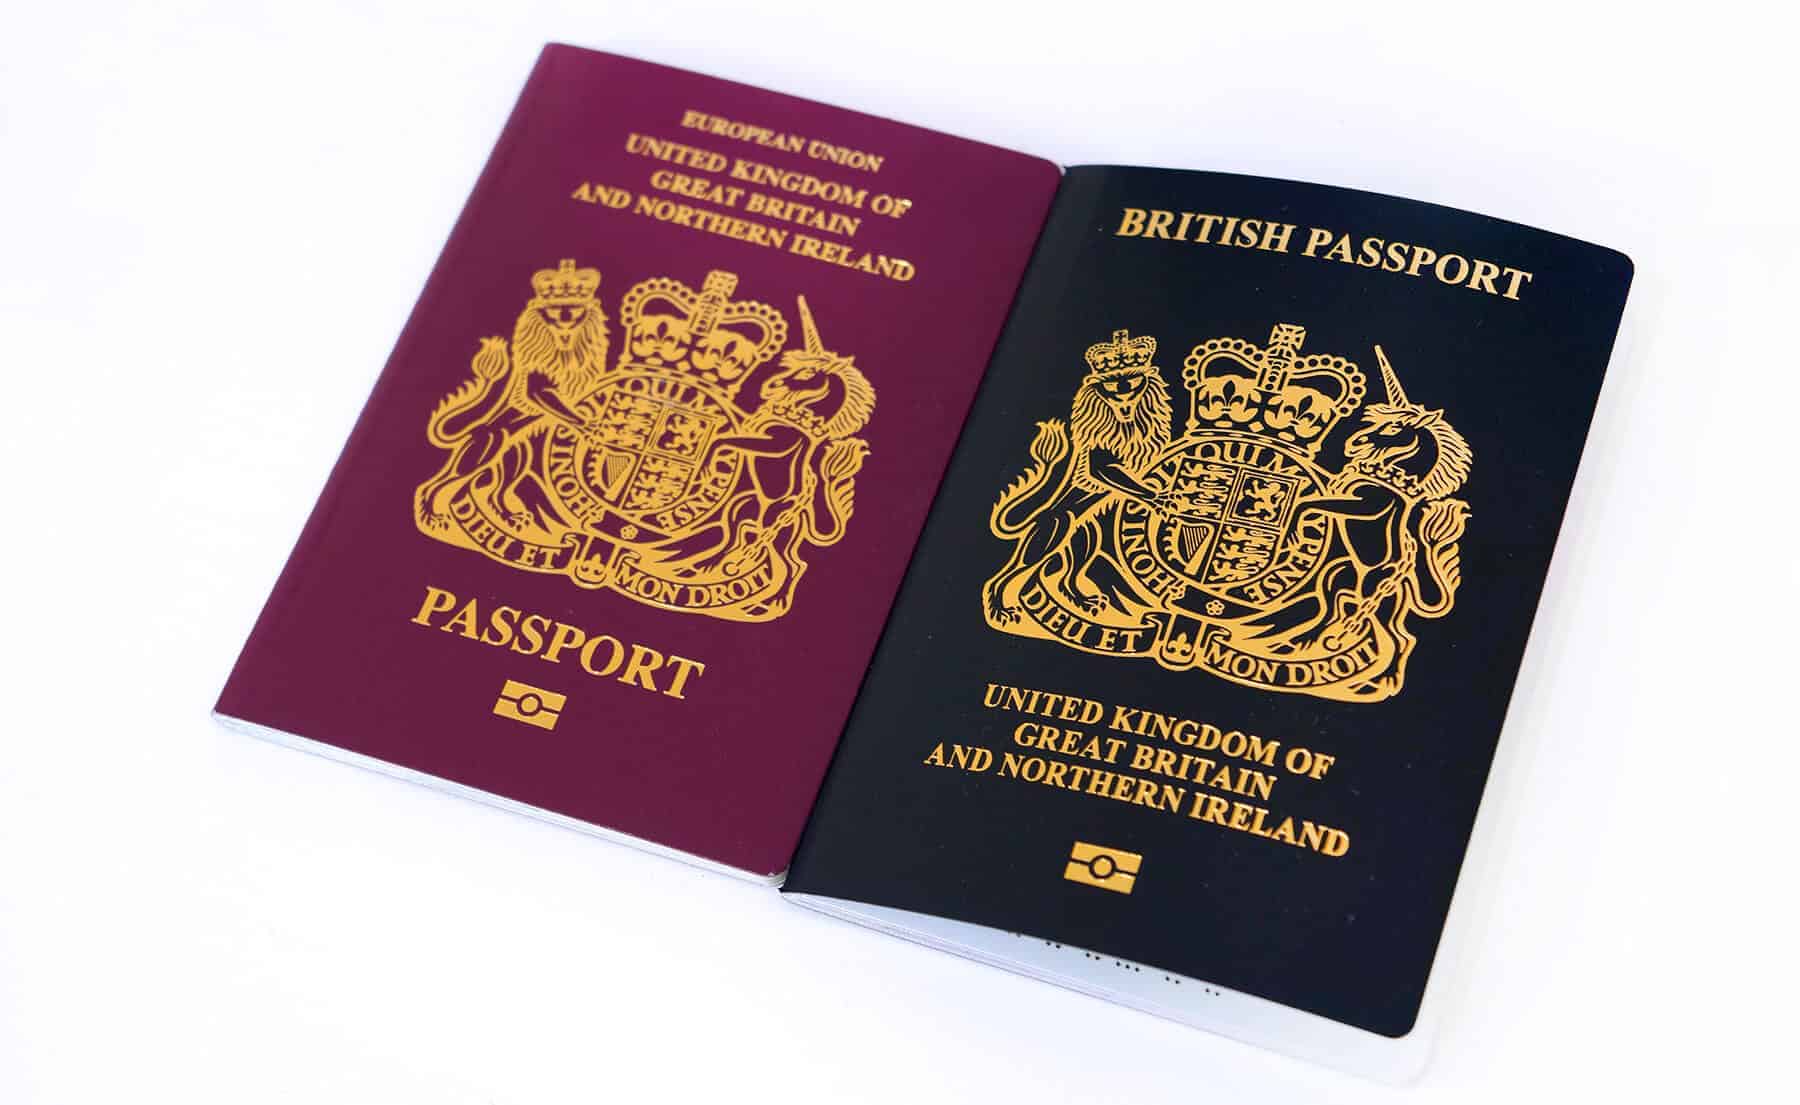 Changes to passport in 2021